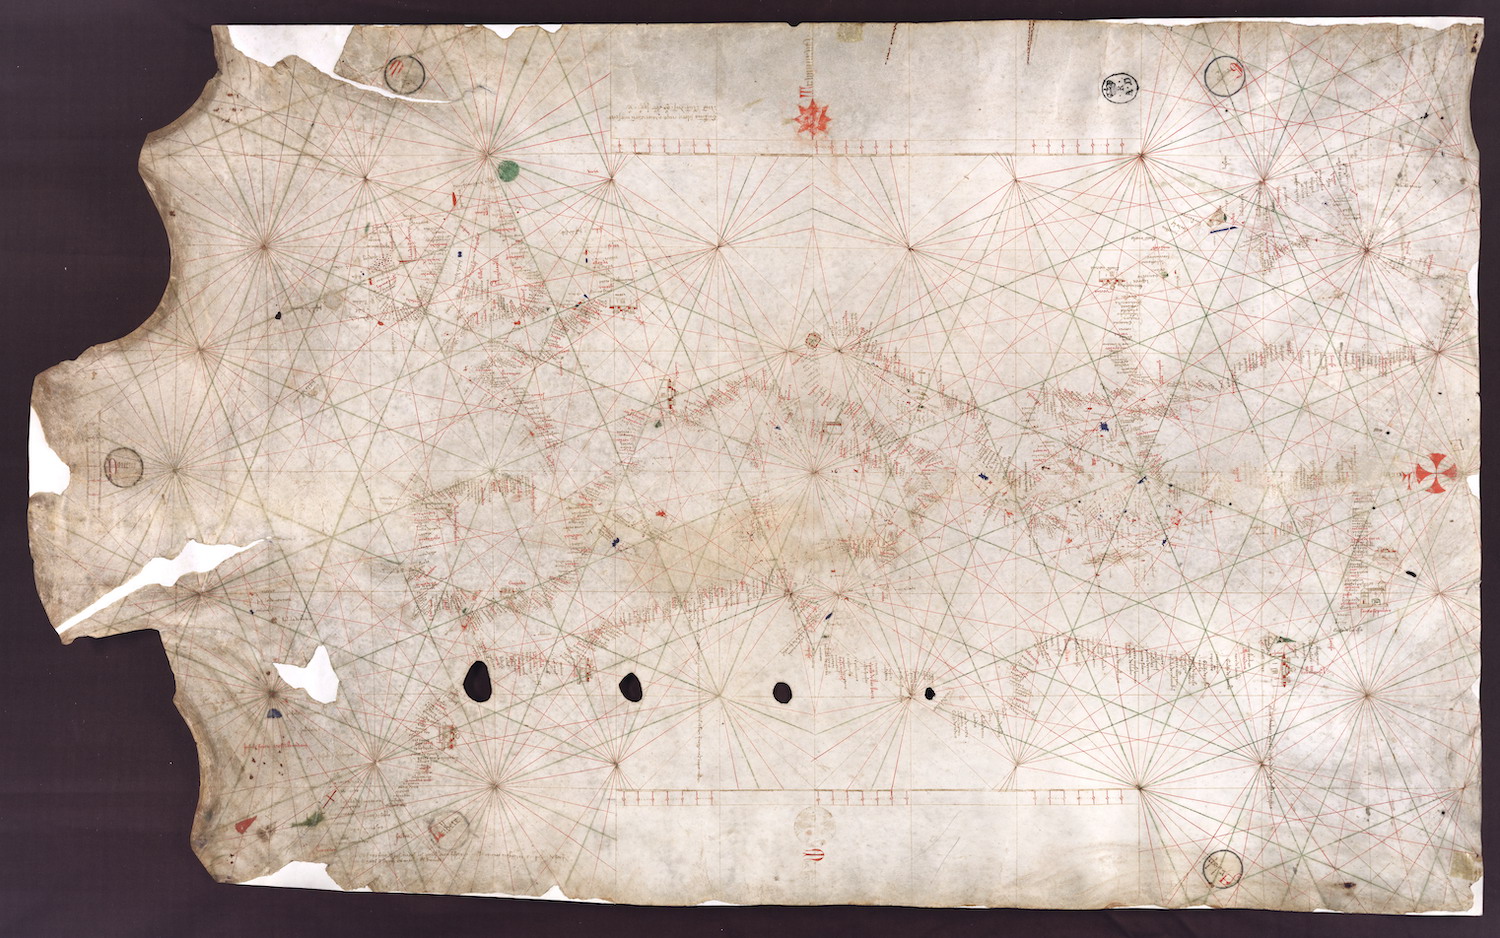 Nautical chart with criss crossing lines radiating from fixed points. 